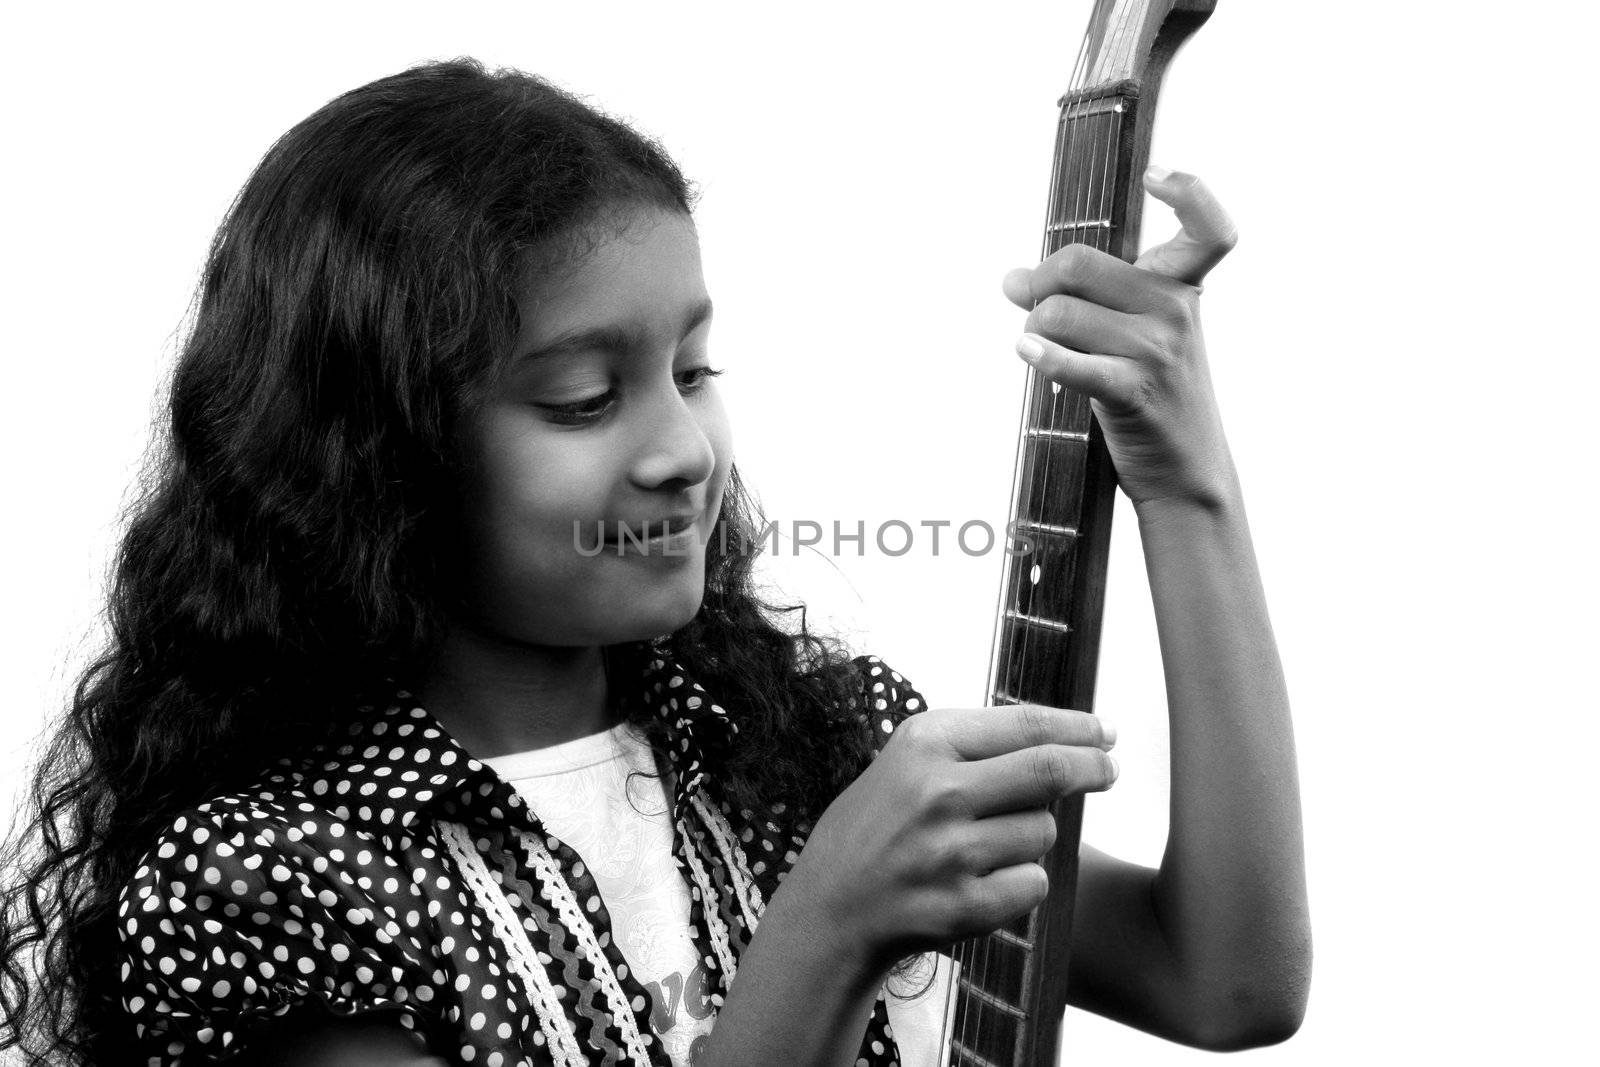 A black & white portrait of a cute Indian girl trying to study an acoustic guitar closely.